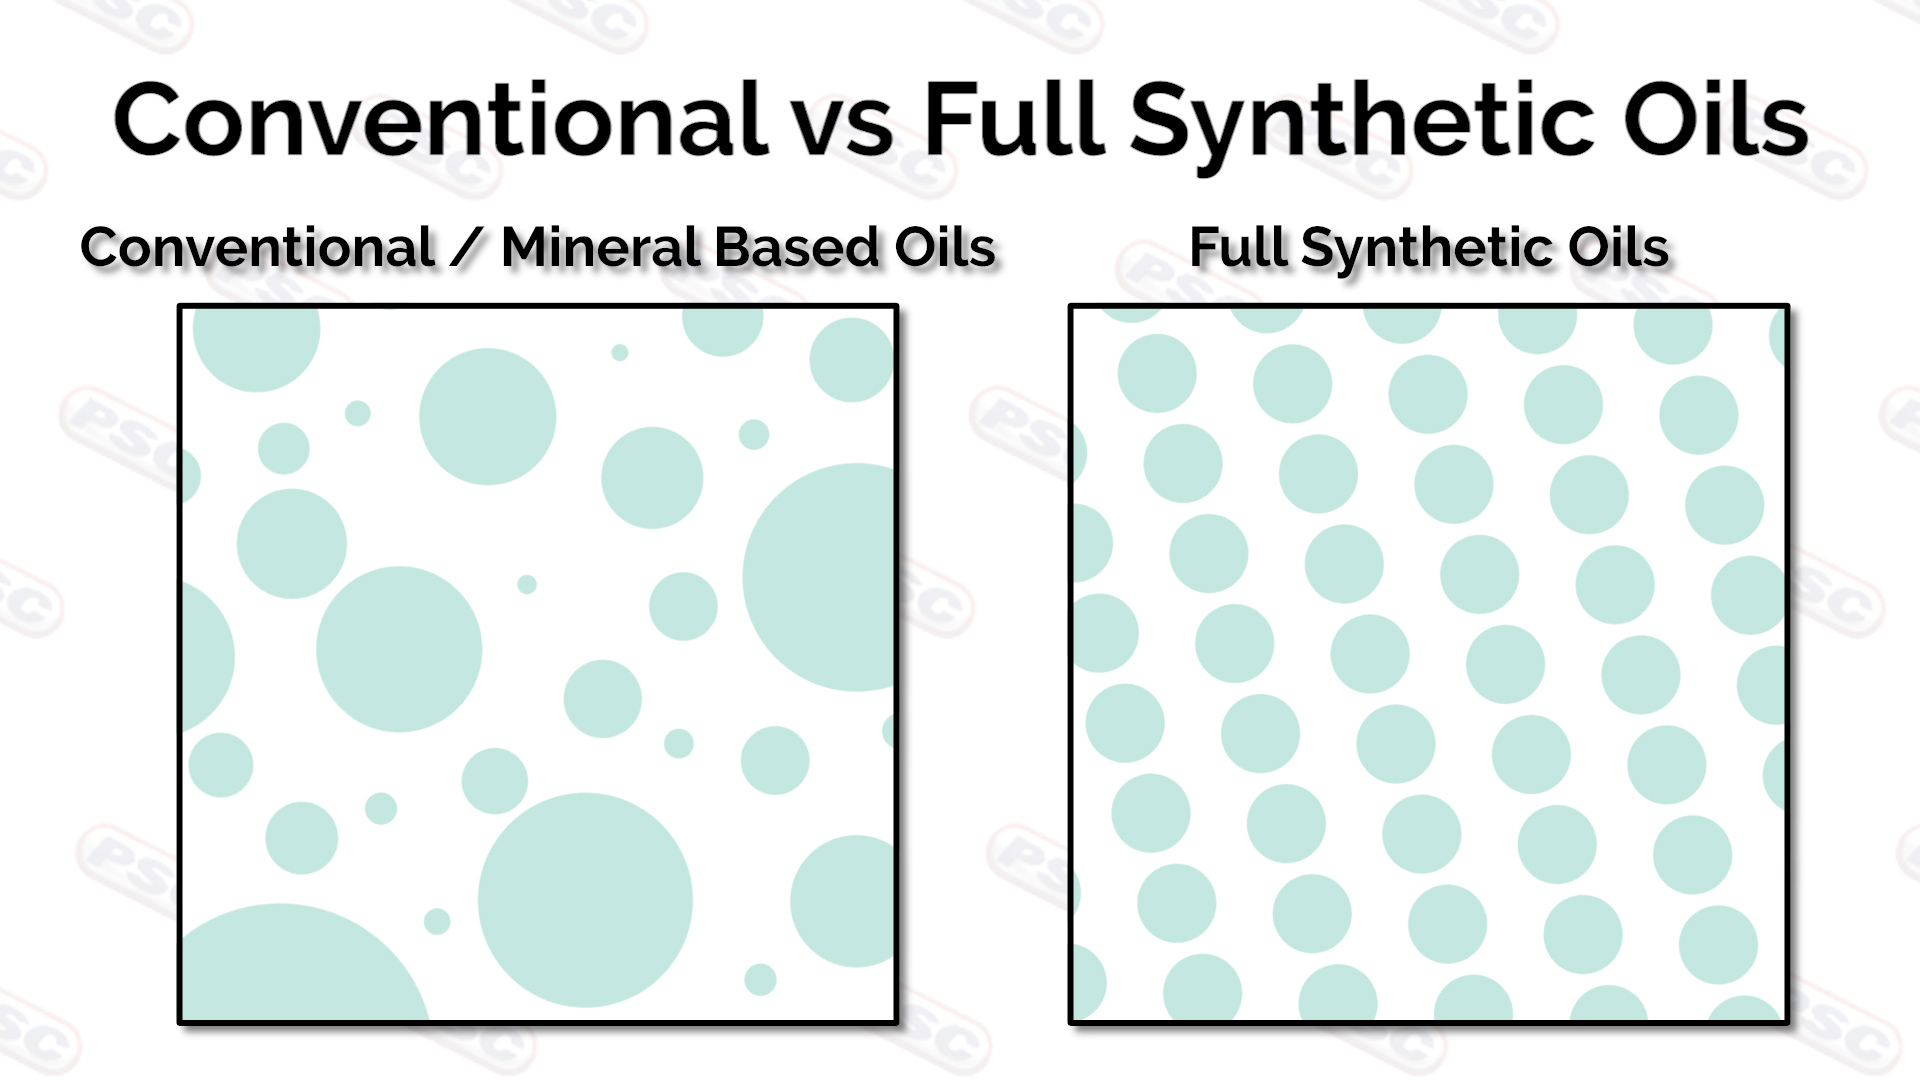 conventional oils' molecules are scattered. Synthetic oils' are uniform.